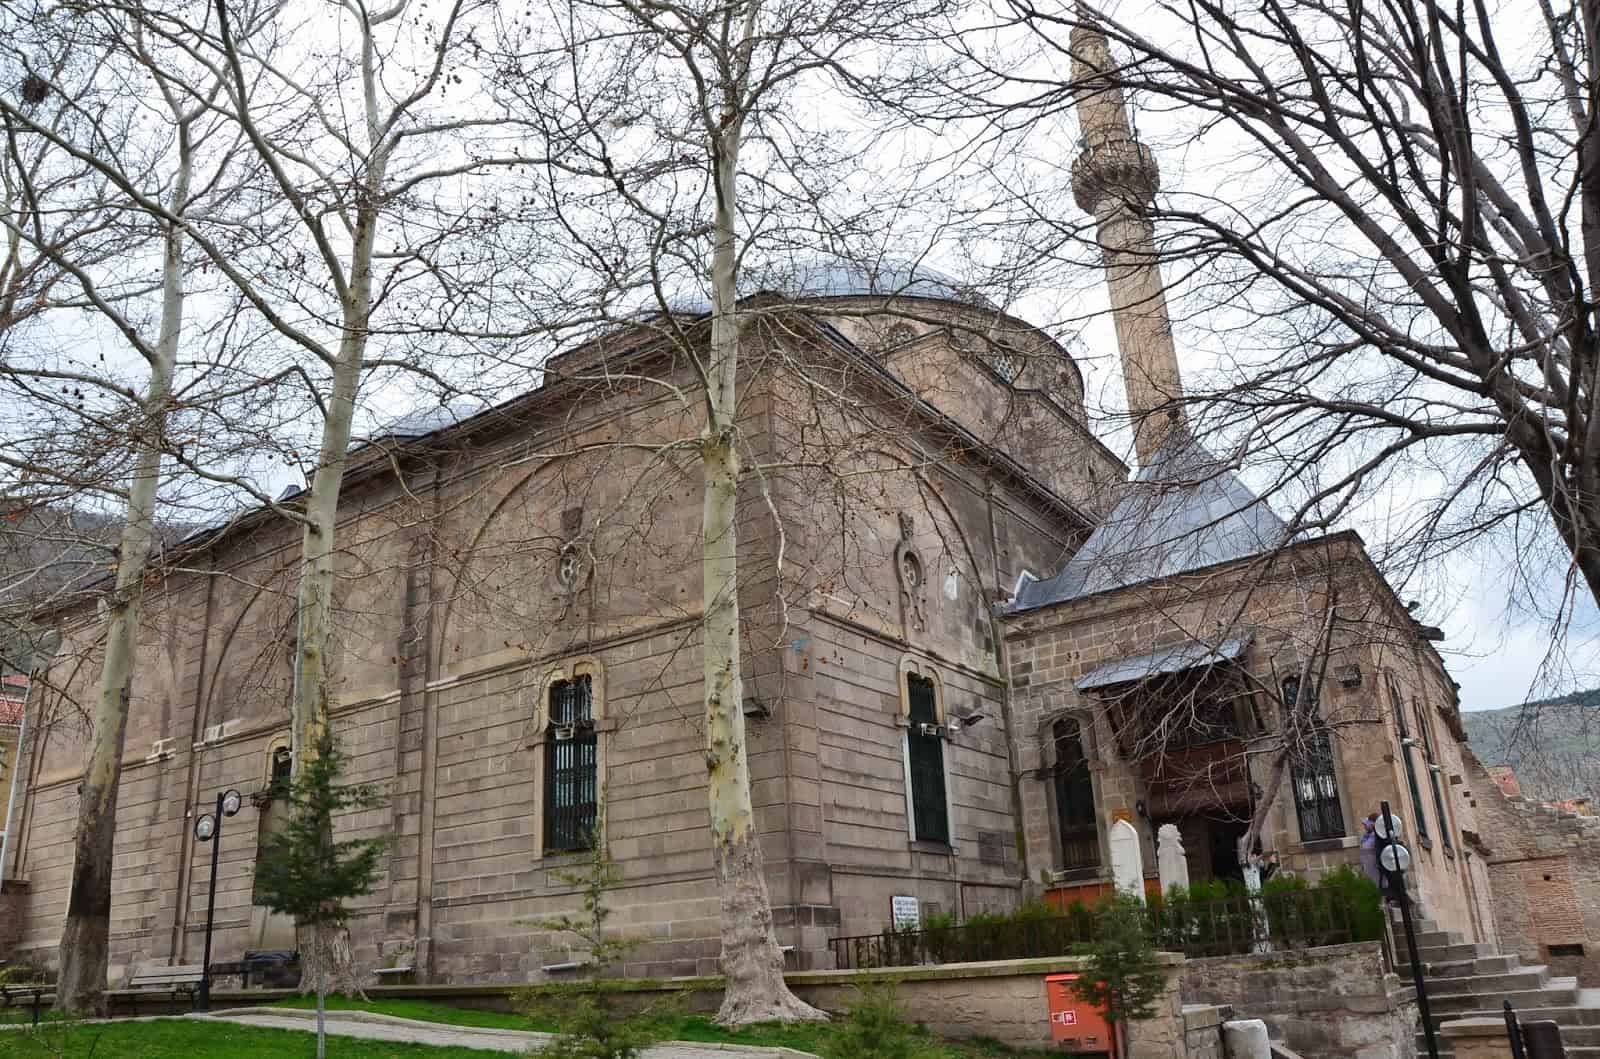 Mosque at the Sultan Divani Mevlevi Lodge Museum in Afyon, Turkey